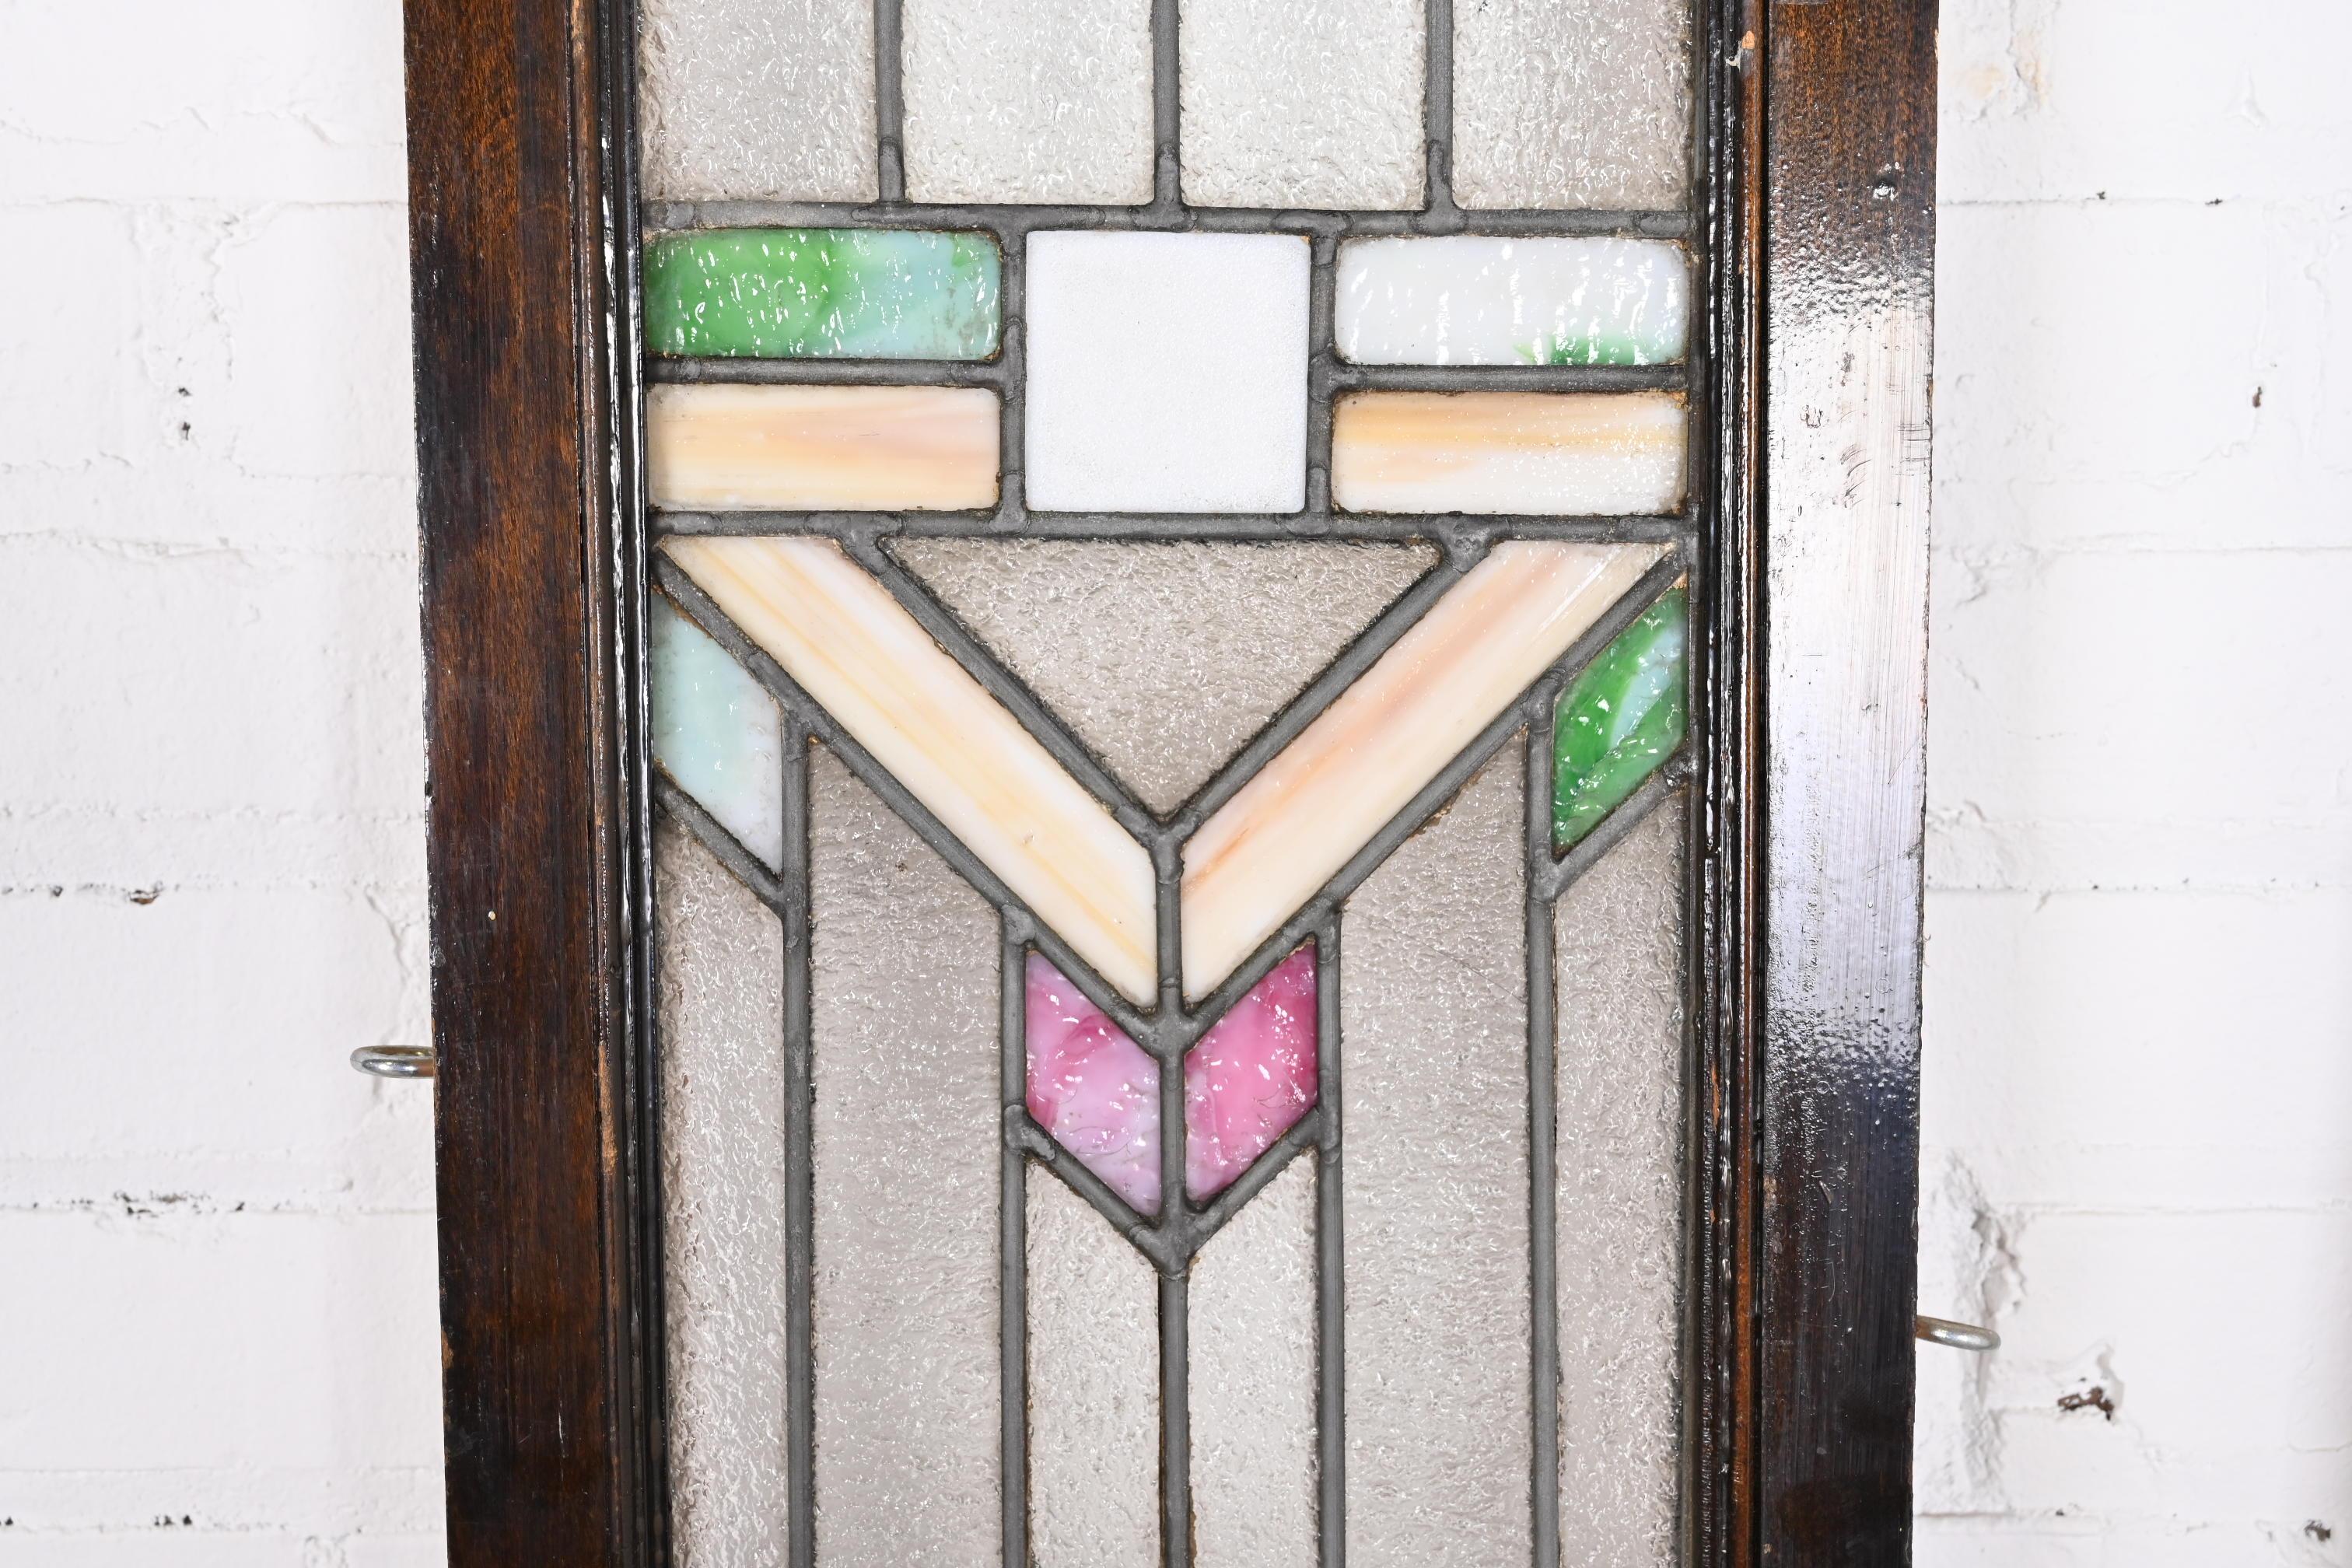 Arts and Crafts Frank Lloyd Wright Style Prairie School Arts & Crafts Stained Glass Windows